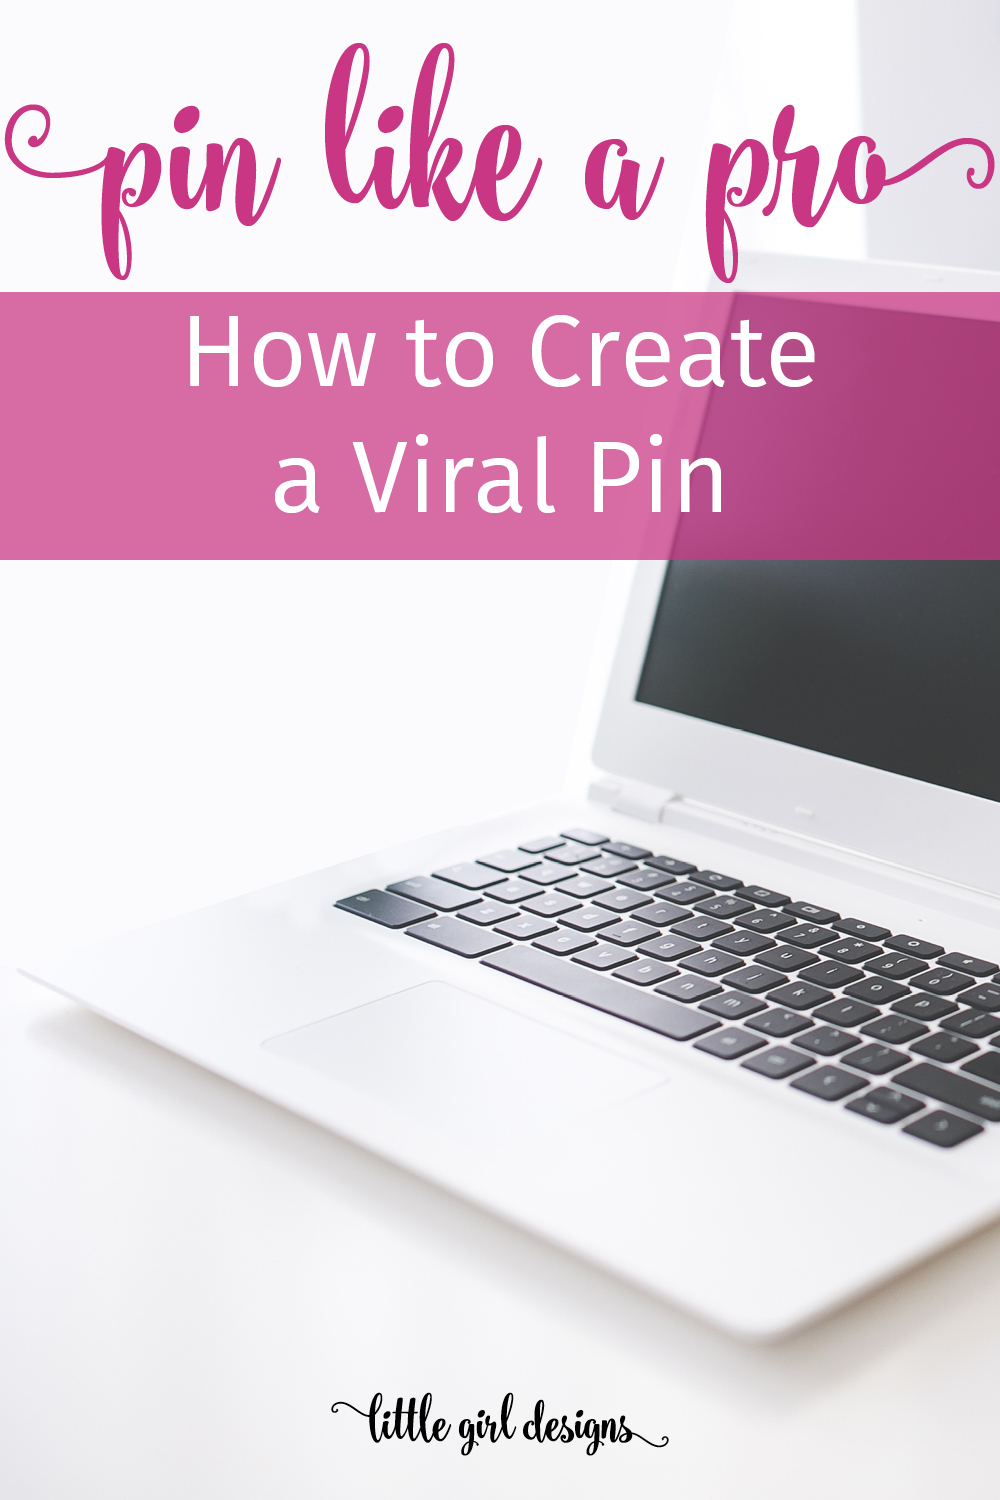 Learn how to create beautiful pins that get clicks and repins! This tutorial shares everything you need to know to create a viral pin.